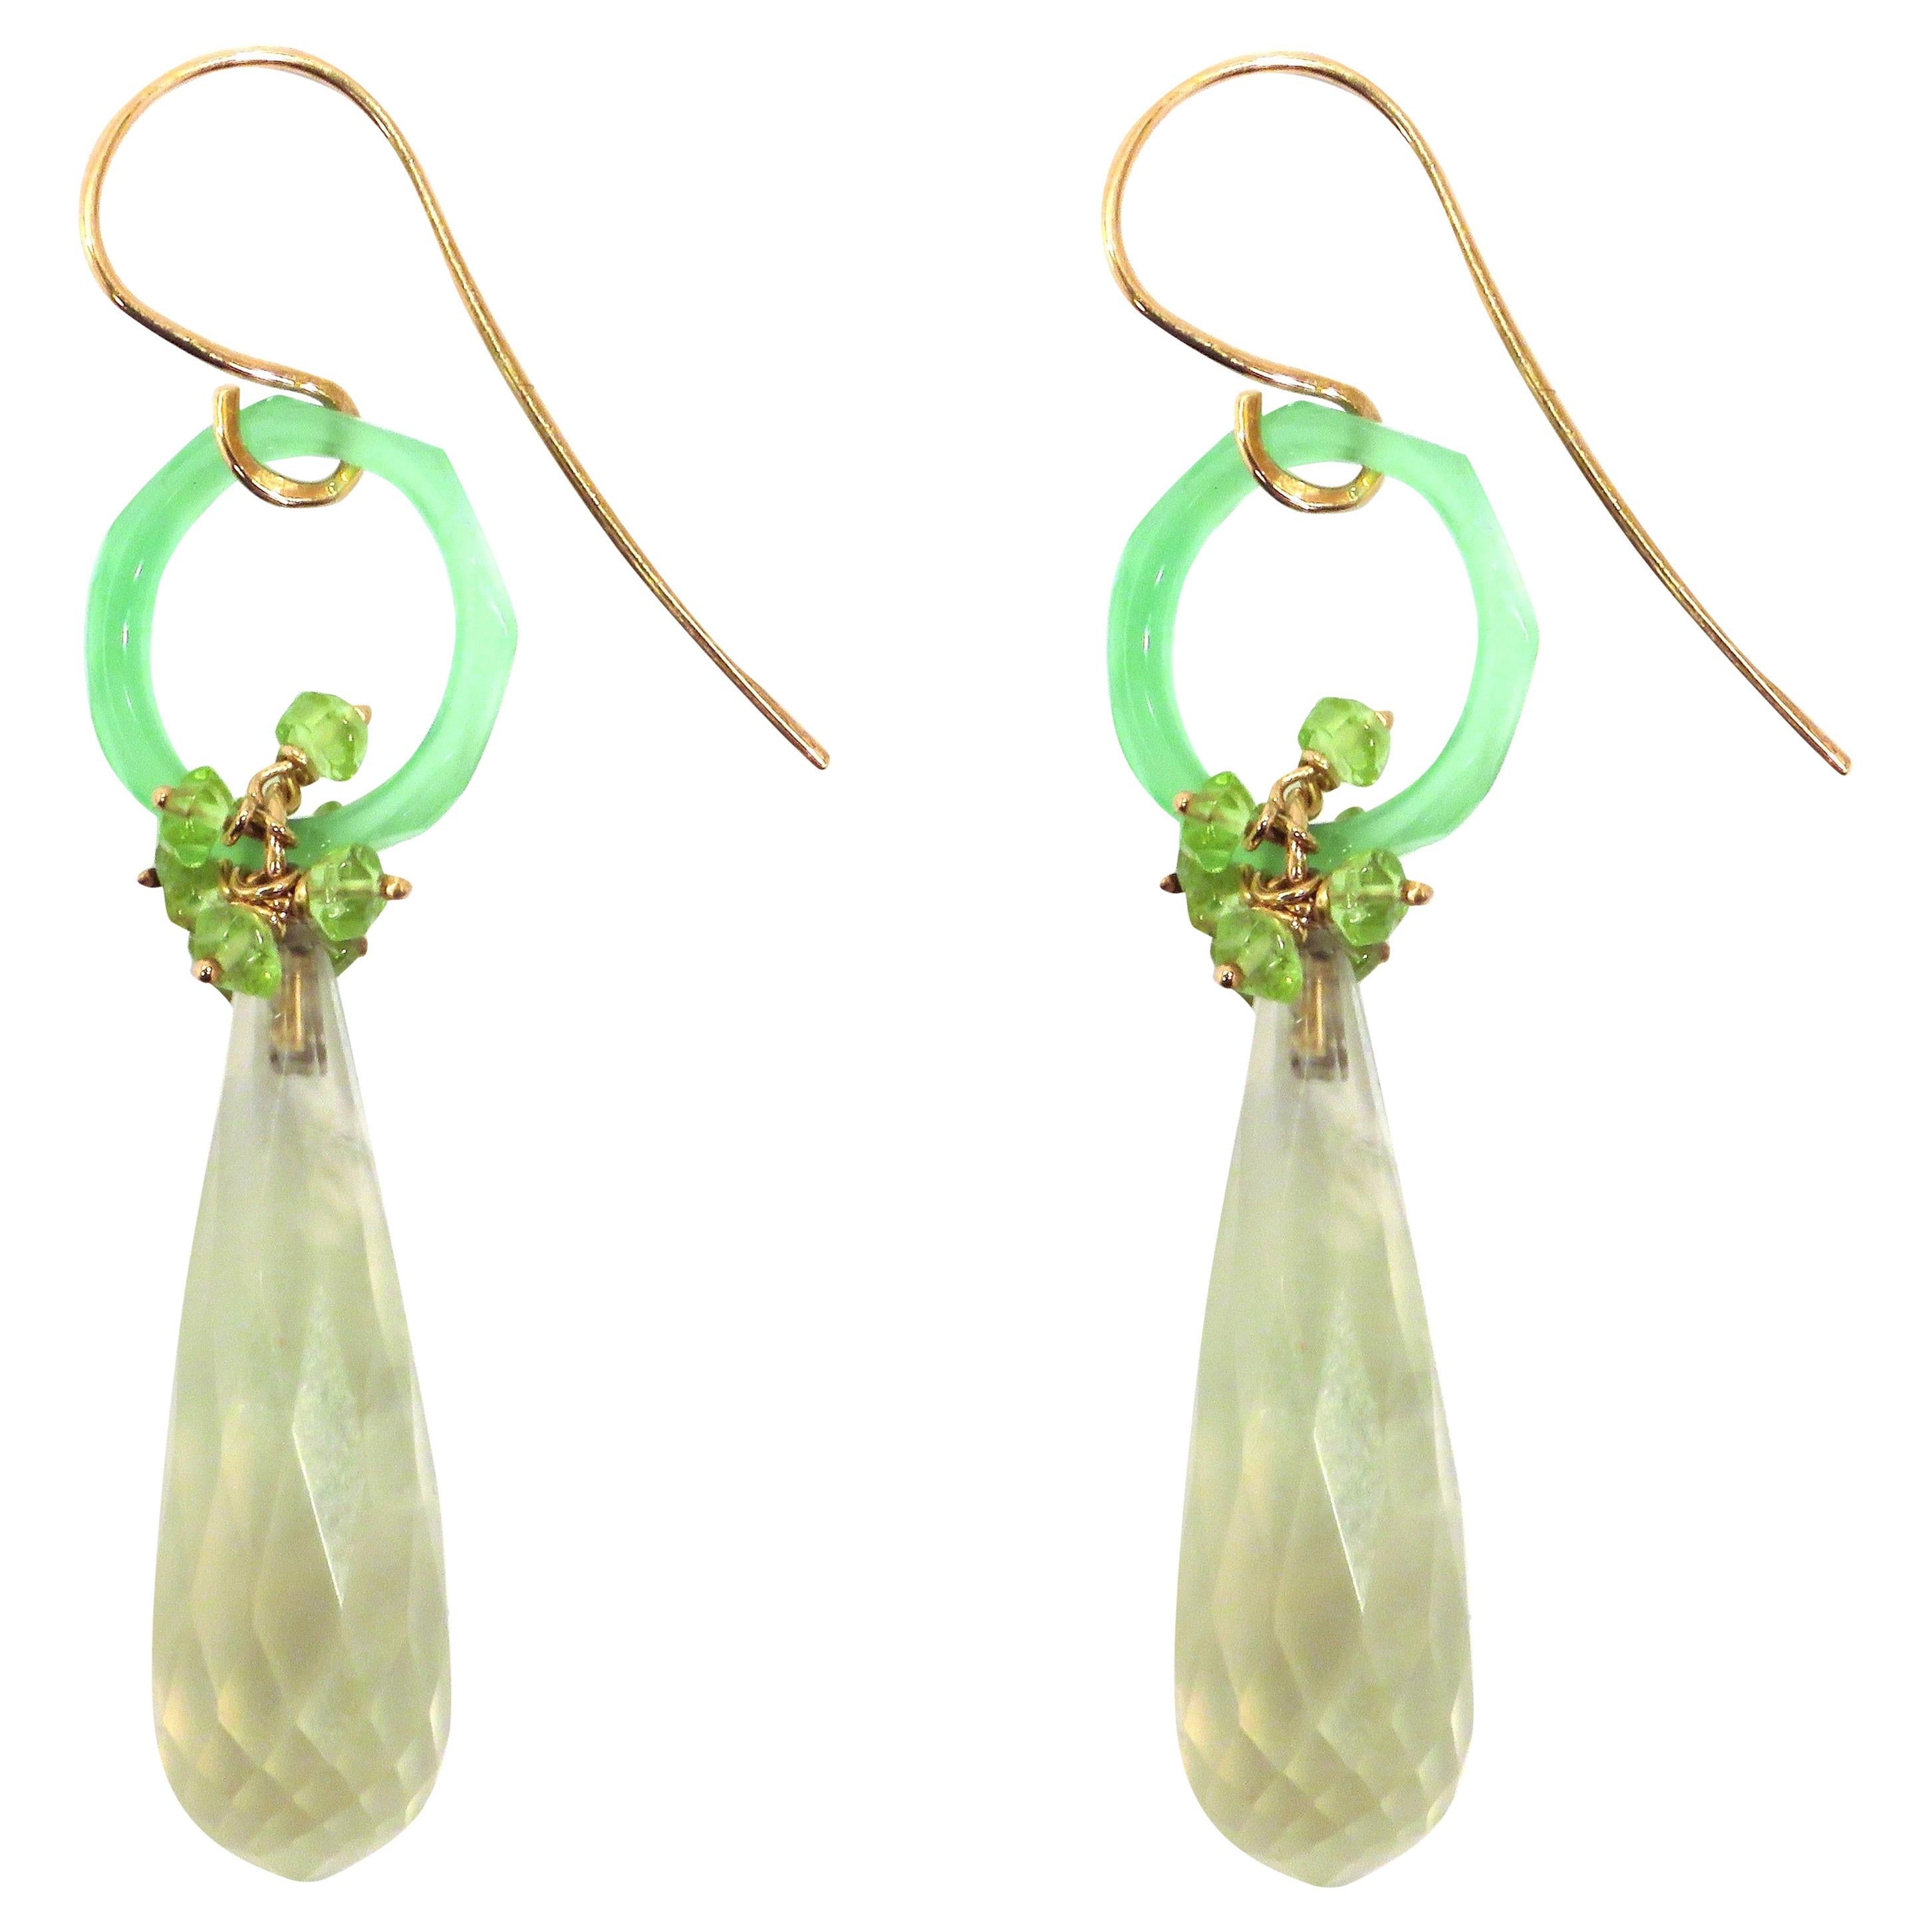 Chalcedony Peridot Rose Gold Earrings Handcrafted in Italy by Botta Gioielli